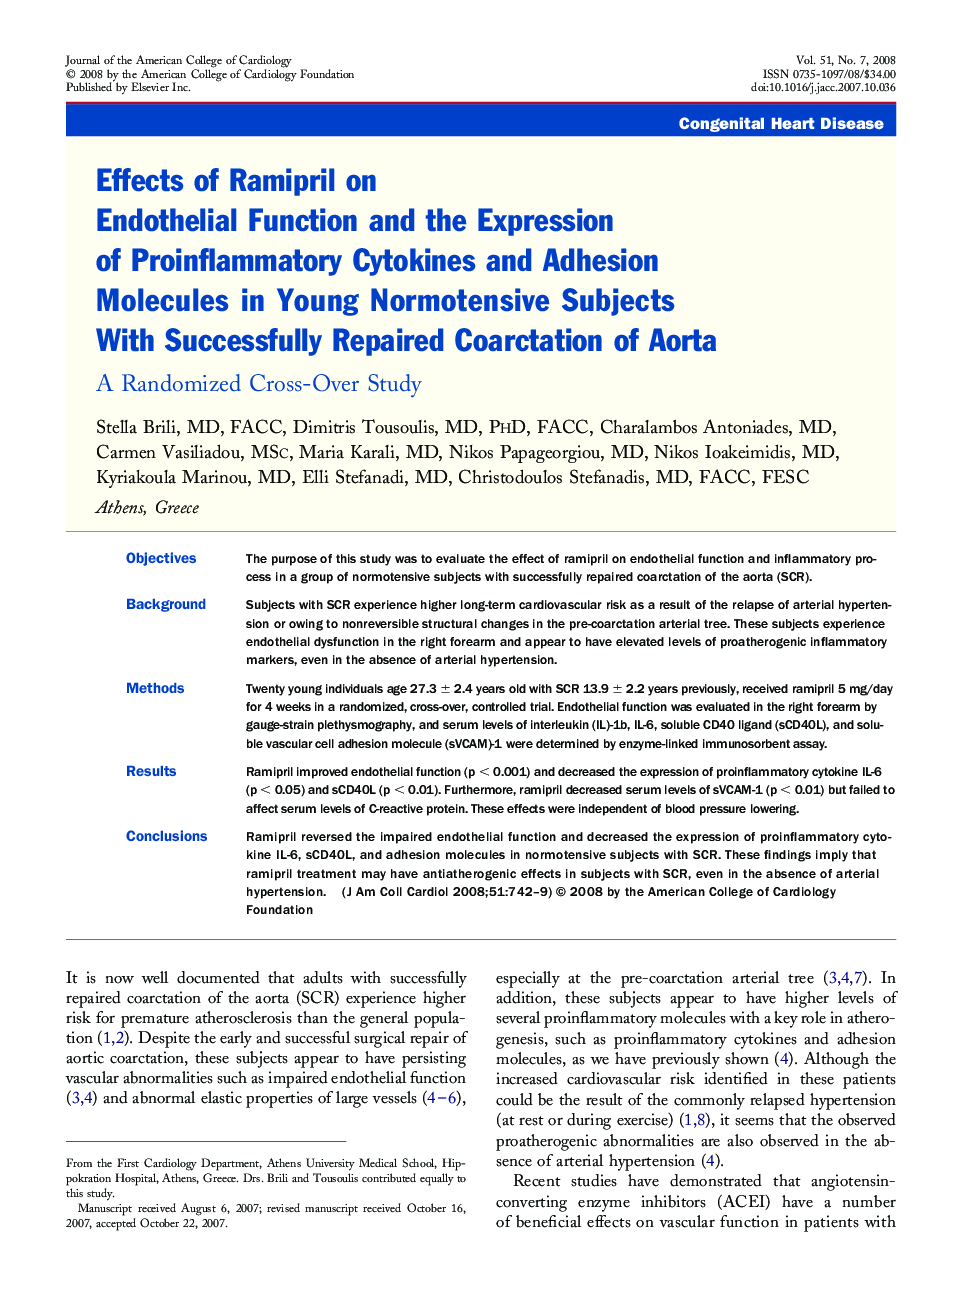 Effects of Ramipril on Endothelial Function and the Expression of Proinflammatory Cytokines and Adhesion Molecules in Young Normotensive Subjects With Successfully Repaired Coarctation of Aorta: A Randomized Cross-Over Study